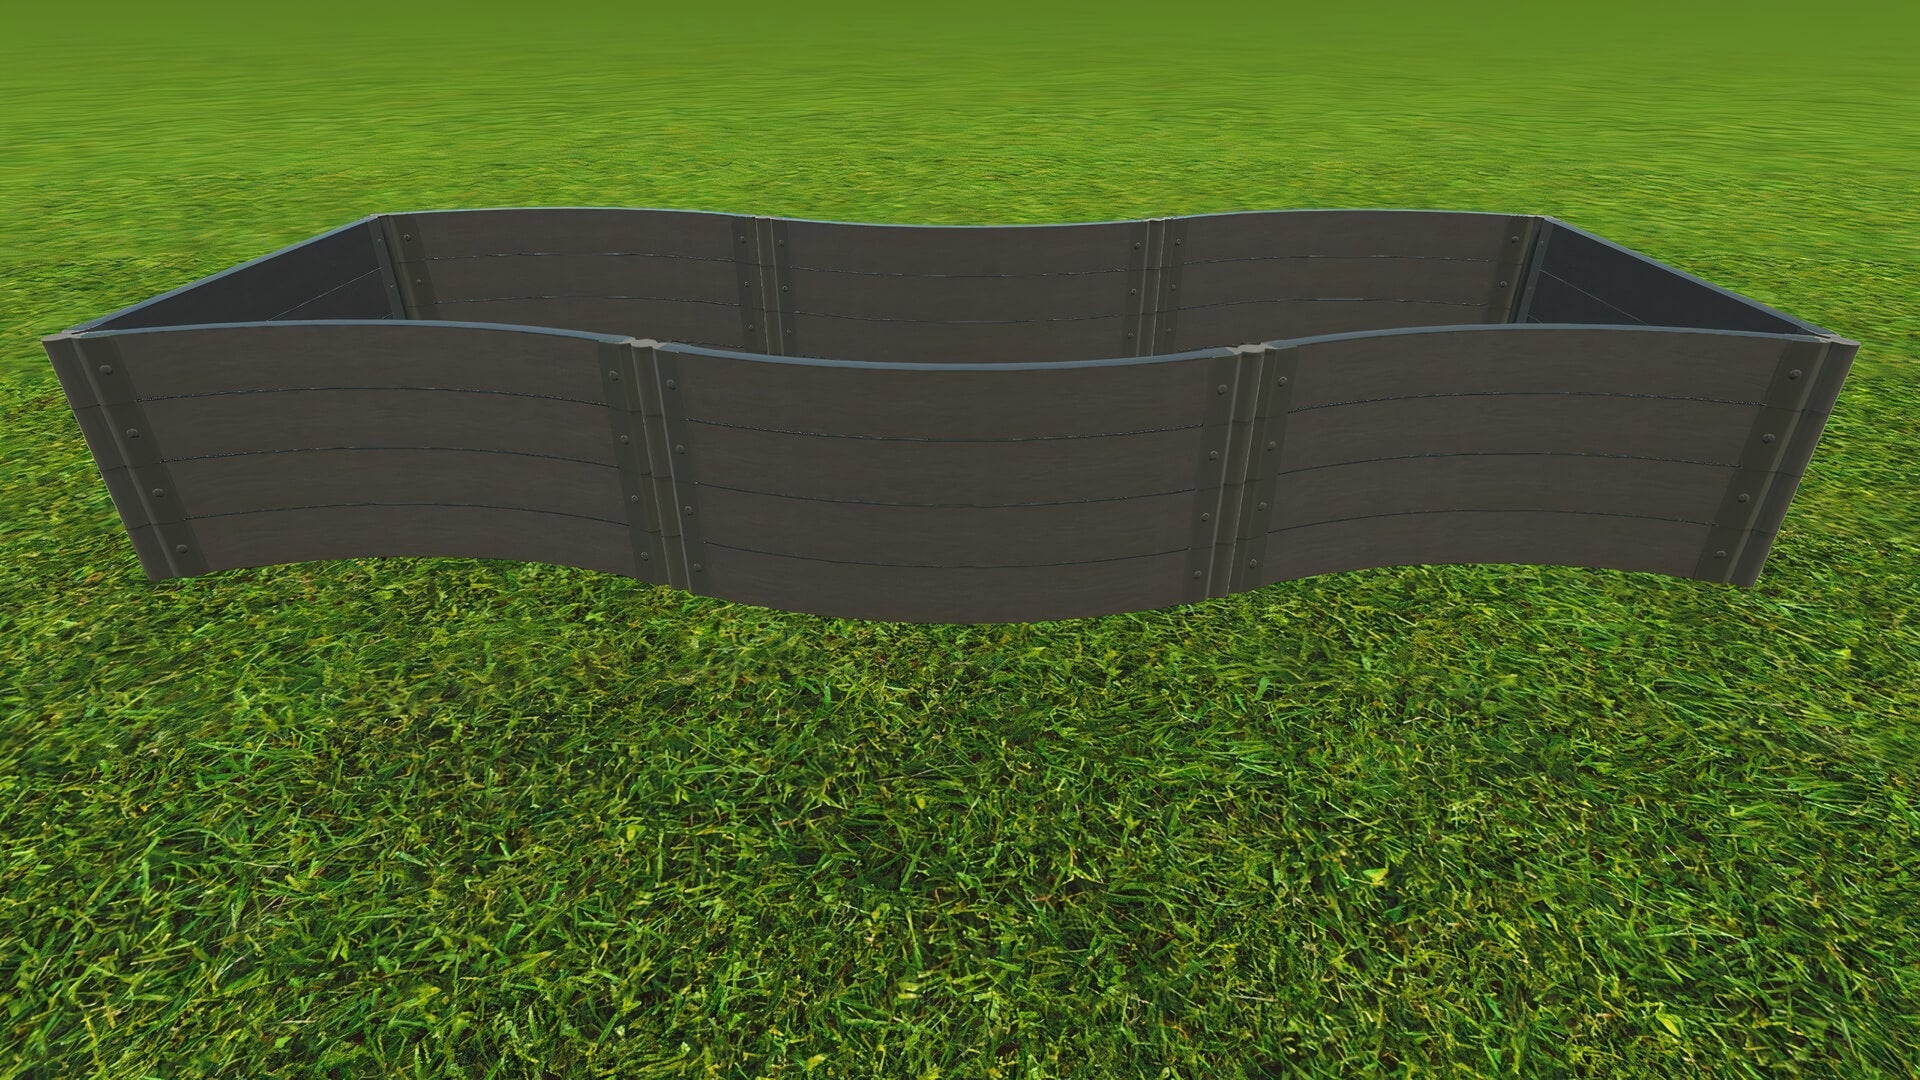 'Lazy Curve' - 4' x 12' Raised Garden Bed Raised Garden Beds Frame It All Weathered Wood 2" 4 = 22"